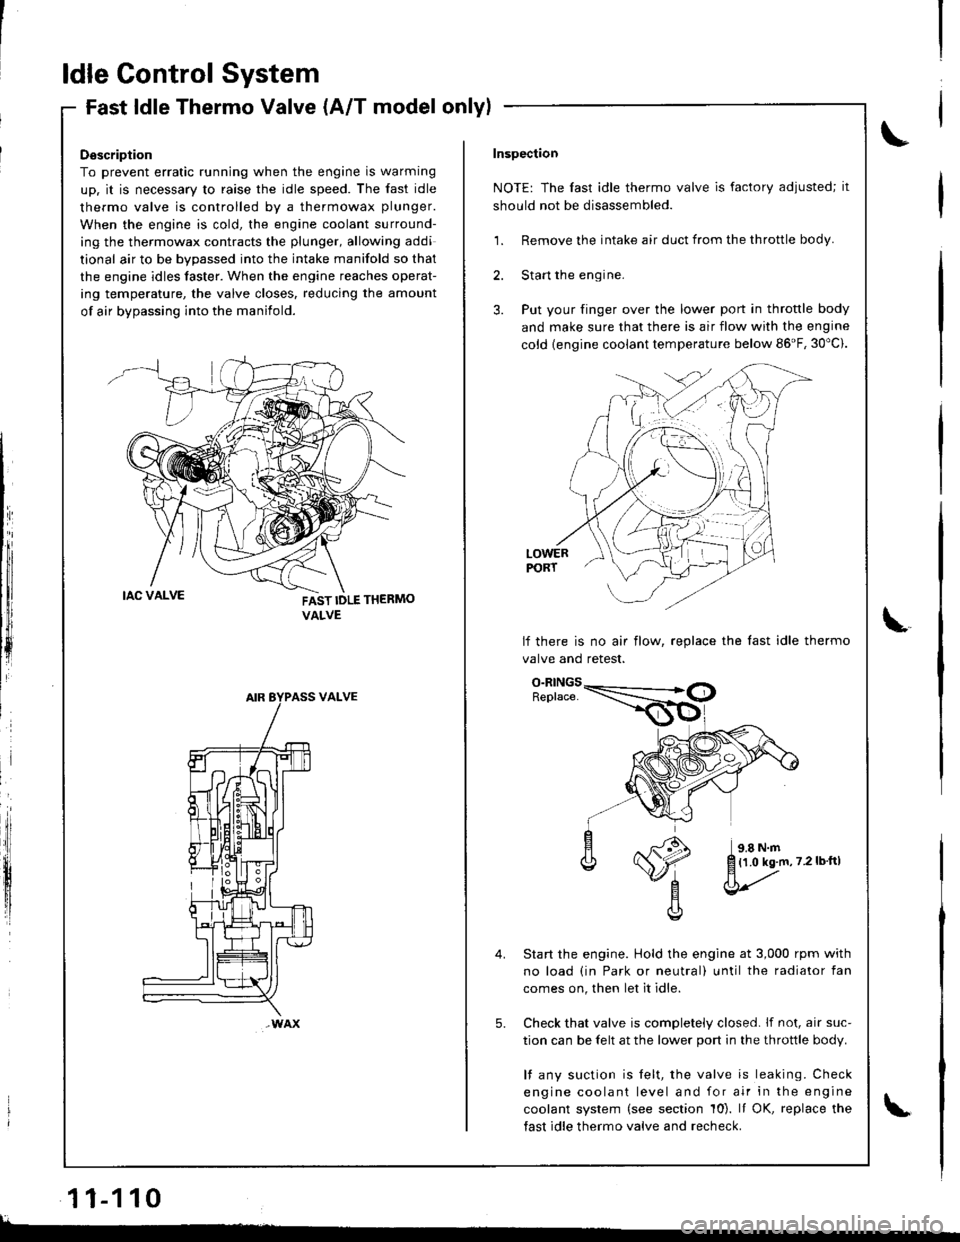 HONDA INTEGRA 1998 4.G Workshop Manual ldle Control System
Fast ldle Thermo Valve (A/T model onlylFast ldle I nermo valve (A/ | mooel
Description
To prevent erratic running when the engine is warming
up. it is necessary to raise the idle s